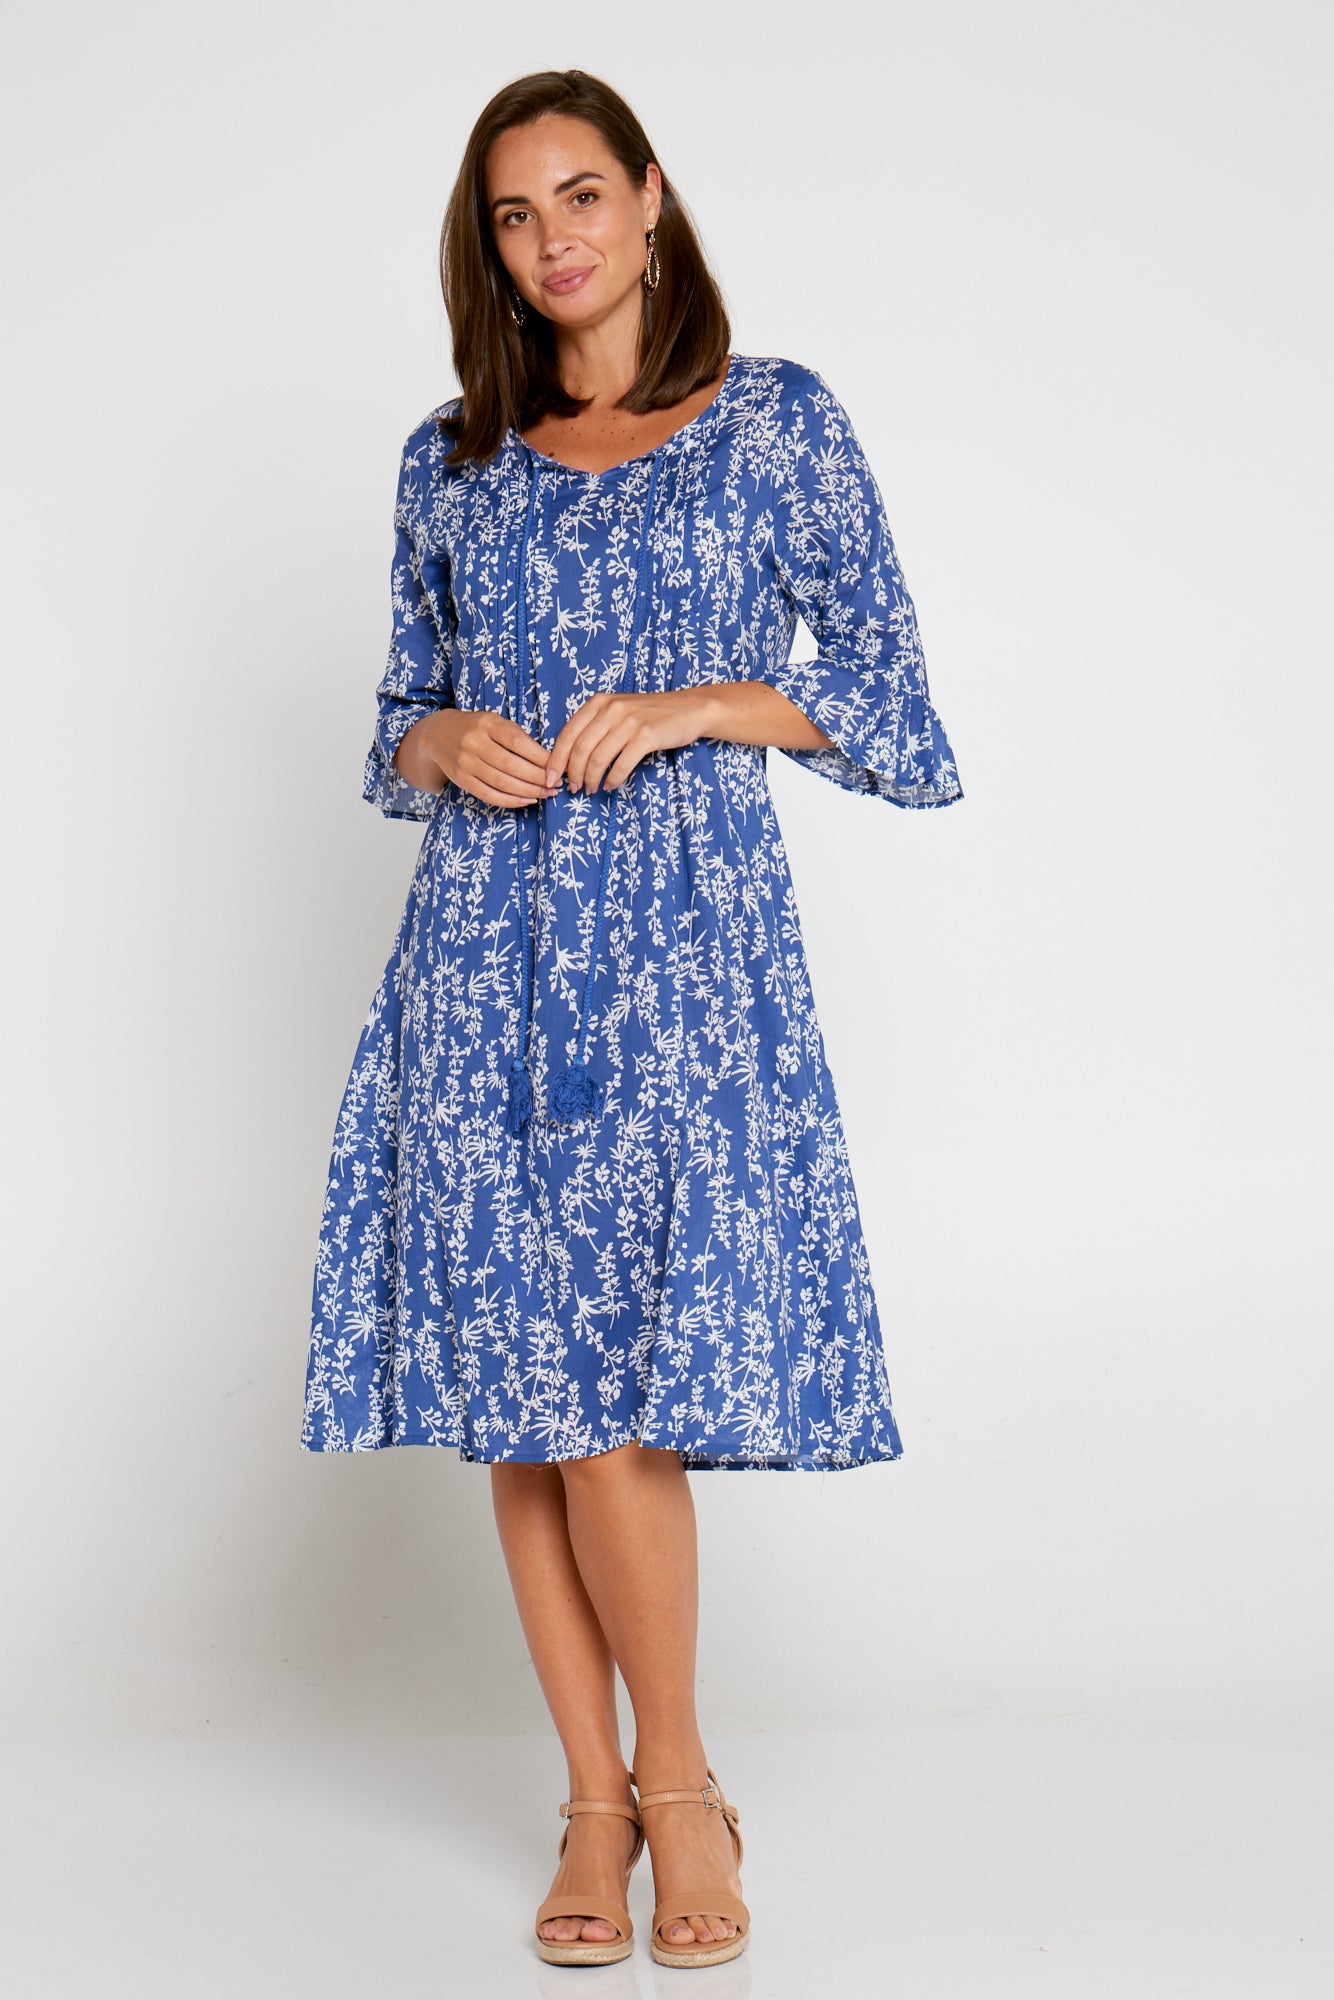 Bethany Cotton Dress - Blue Floral